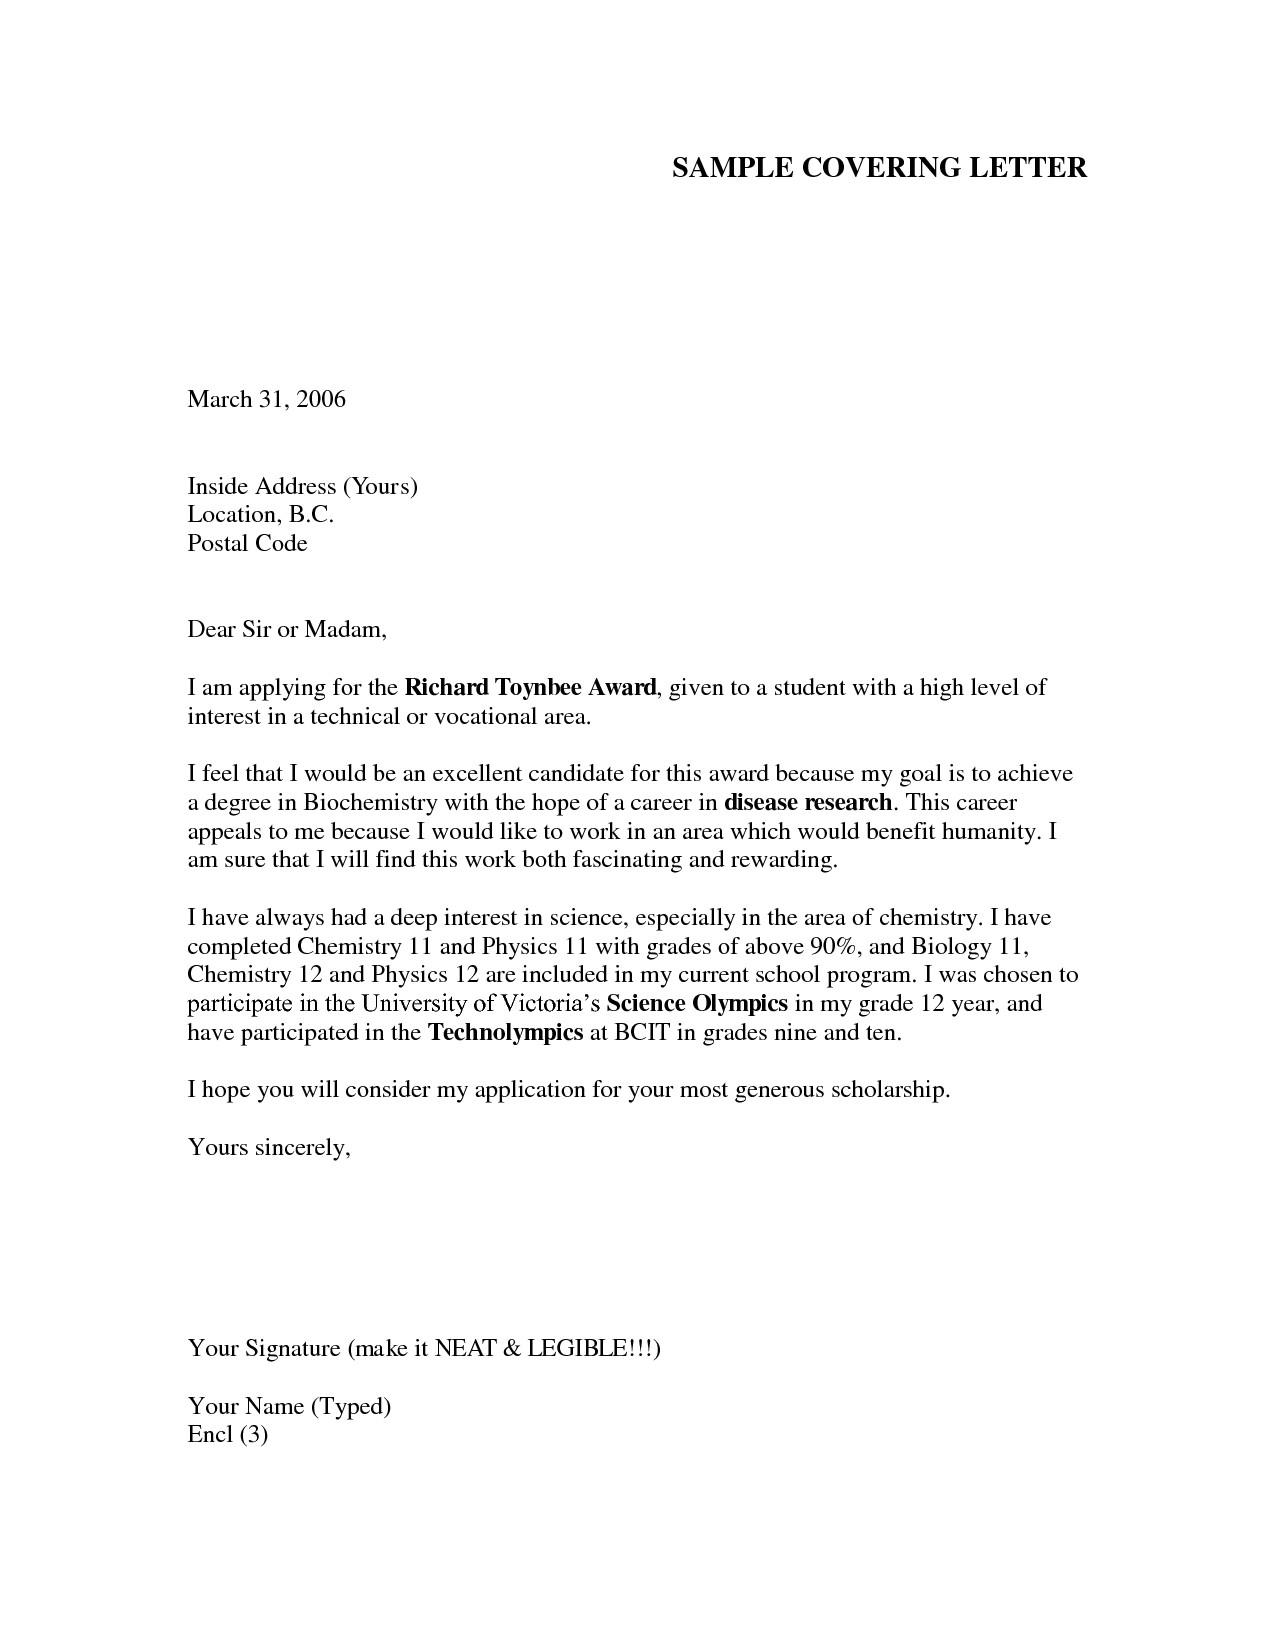 Examples Of Cover Letters for It Jobs Cover Letter Samples How to Make It Perfect